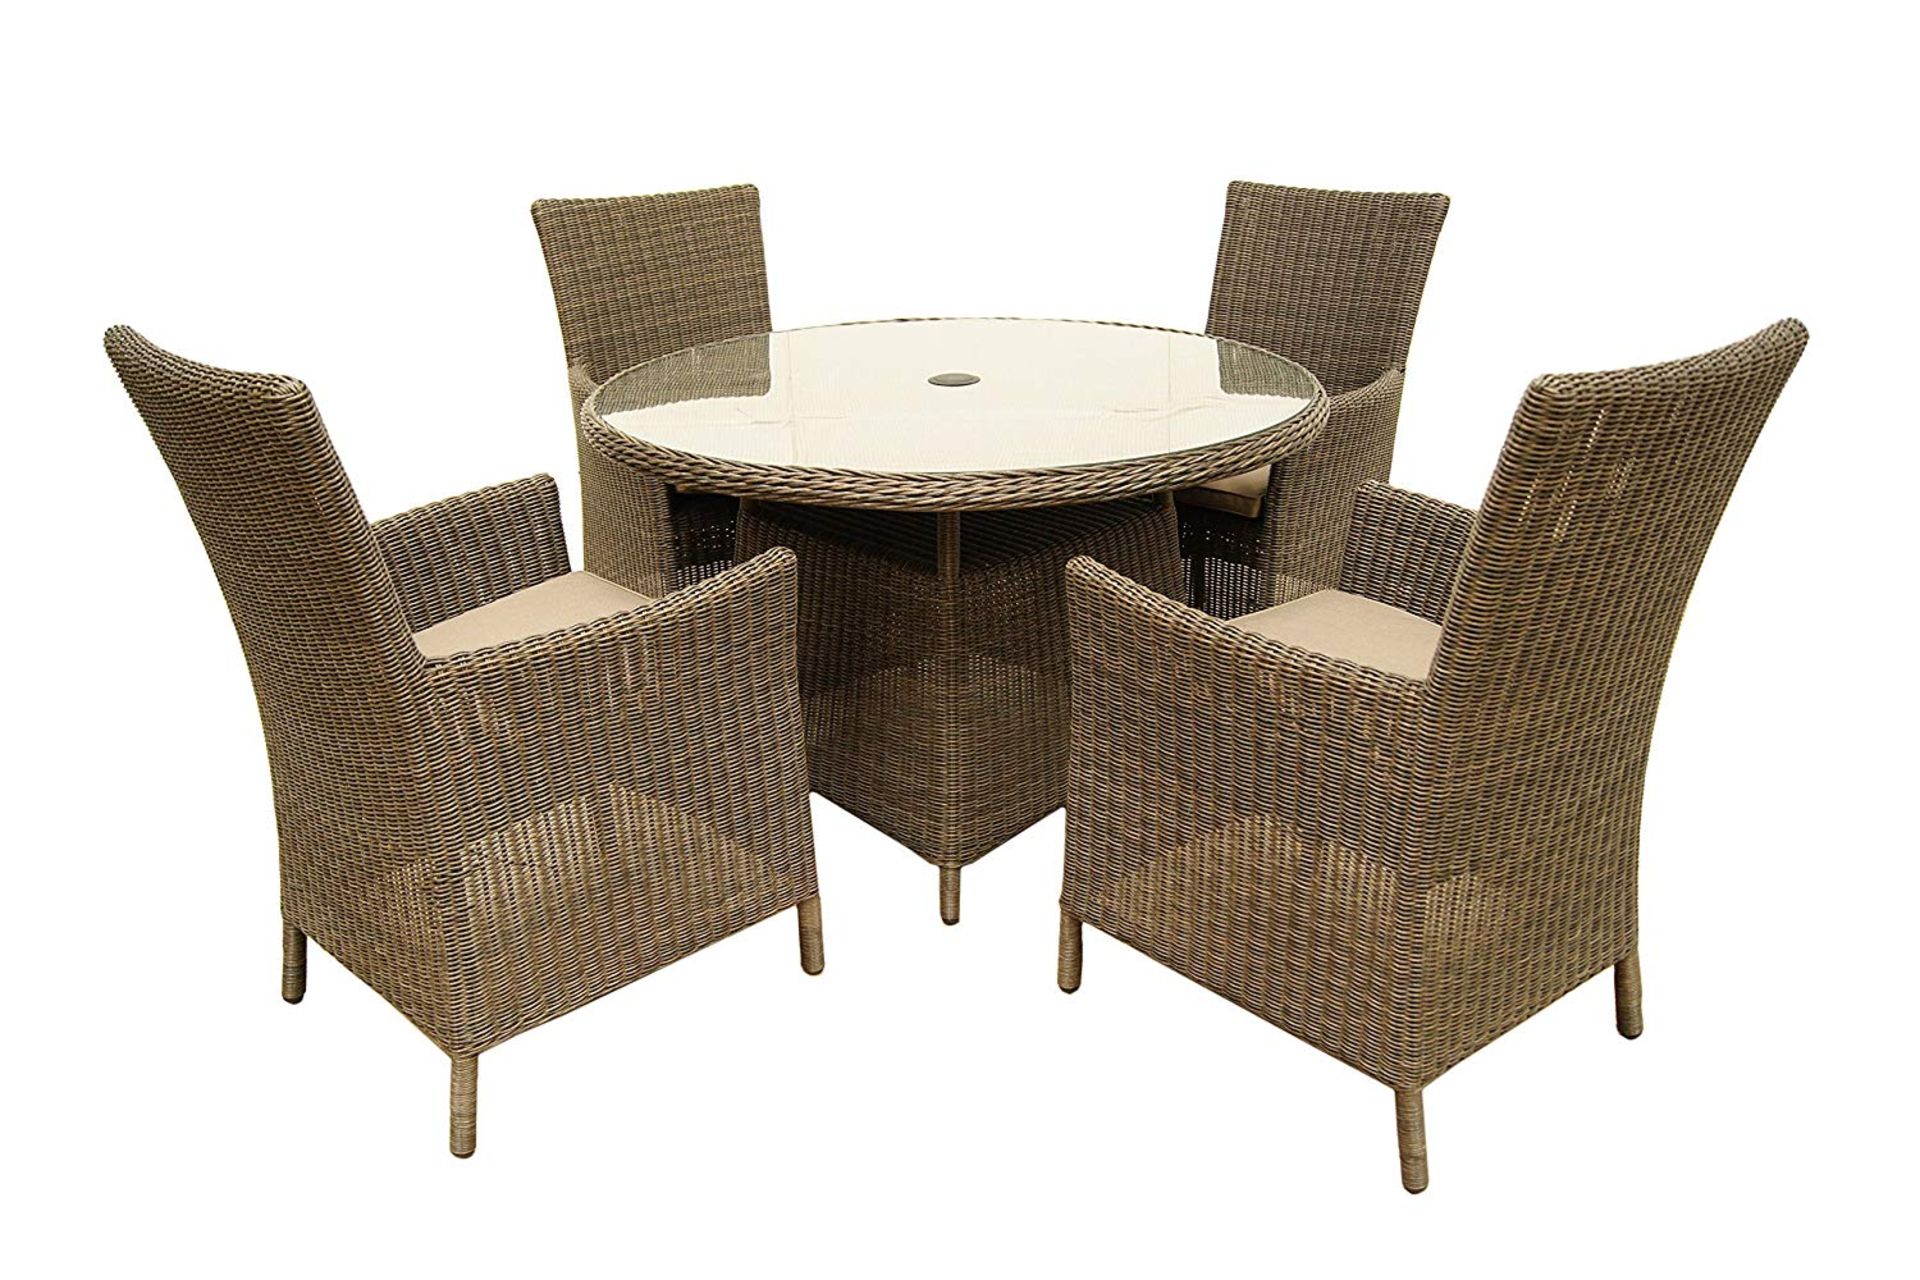 V Brand New St Tropez 120cm Round Four Seater Table With Four Carver Chairs Inc Sahara Cushion (Base